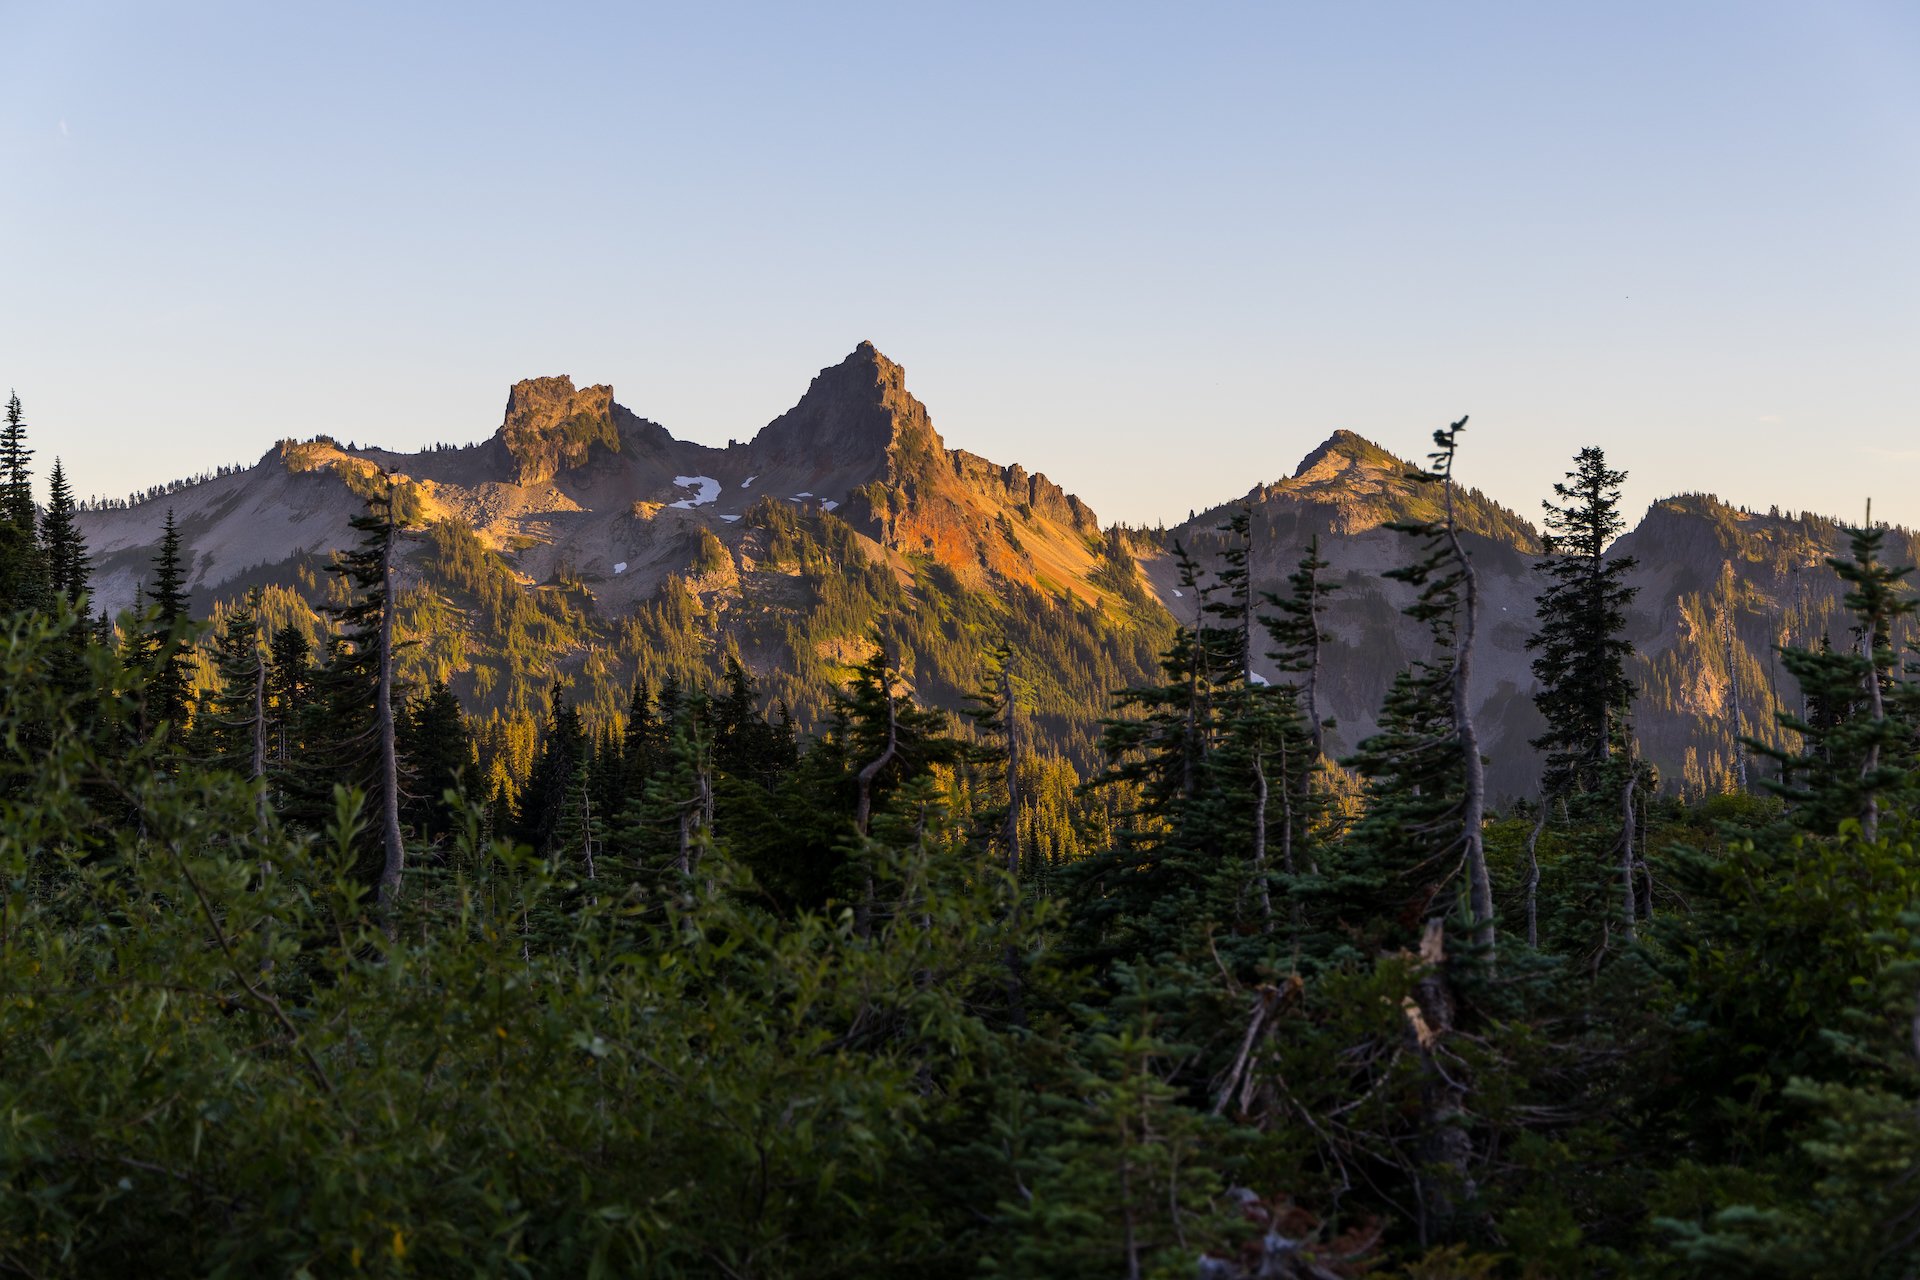  As the sun started to set, the light on the Tatoosh Range started to make the mountains glow. 